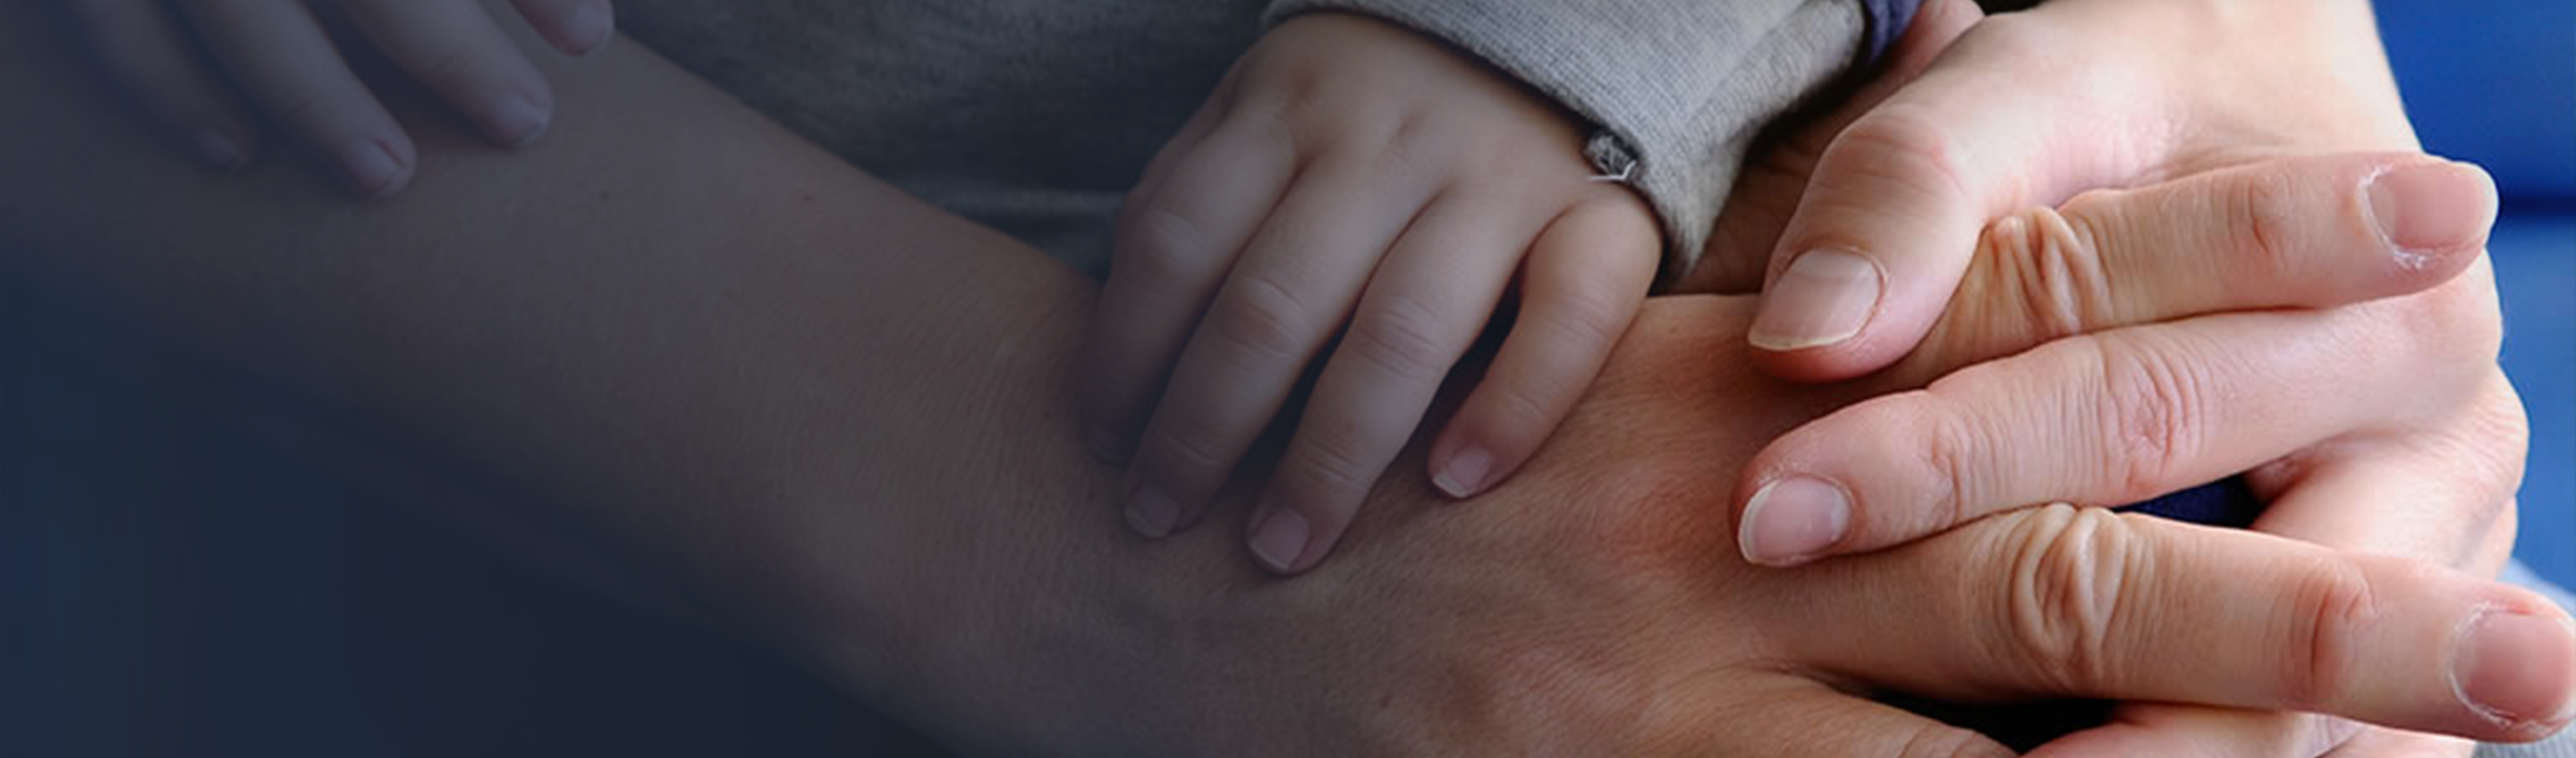 An RMHC family, close up on the hands of an infant holding onto the arm and wrist of one parent holding the hand of another